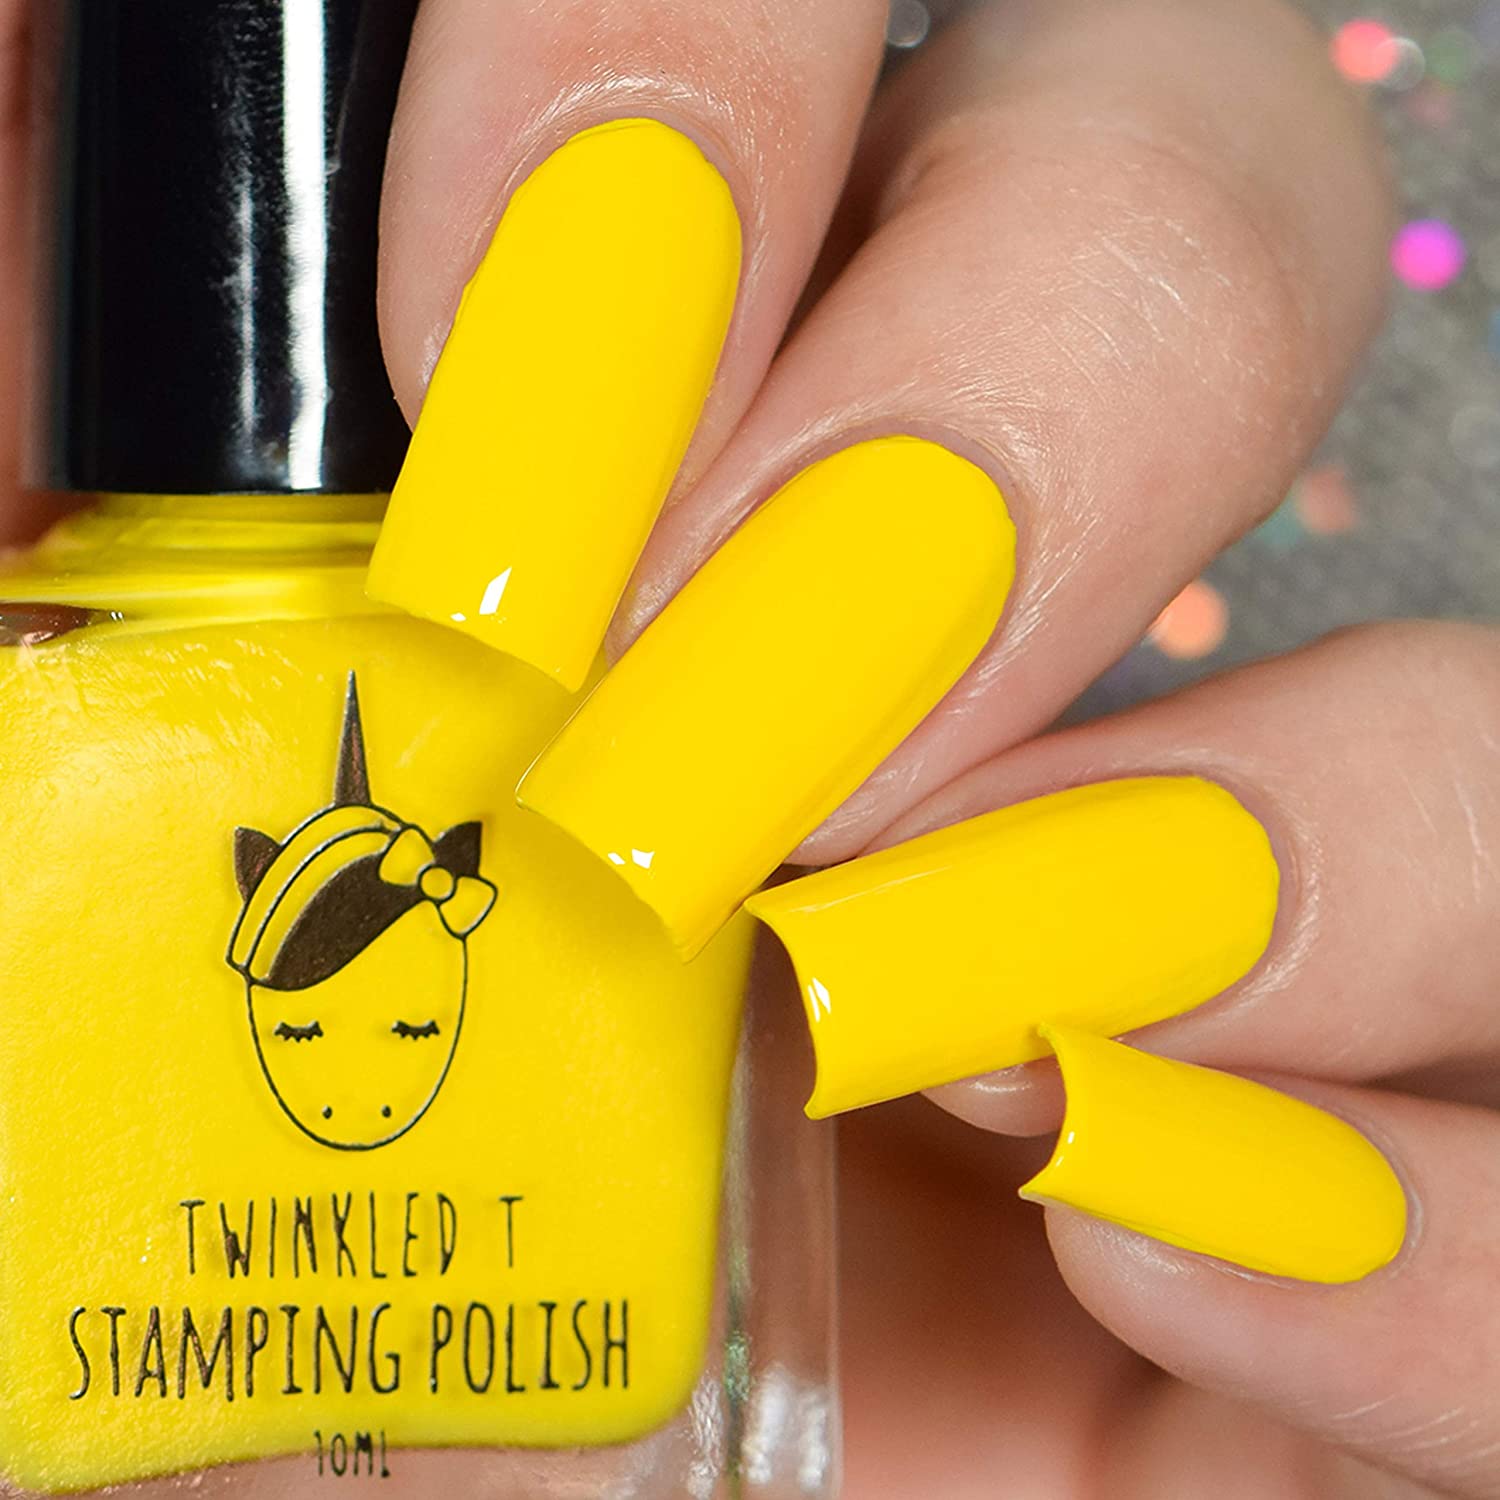 2. Stamping Polish Opaque In 1 Coat … 